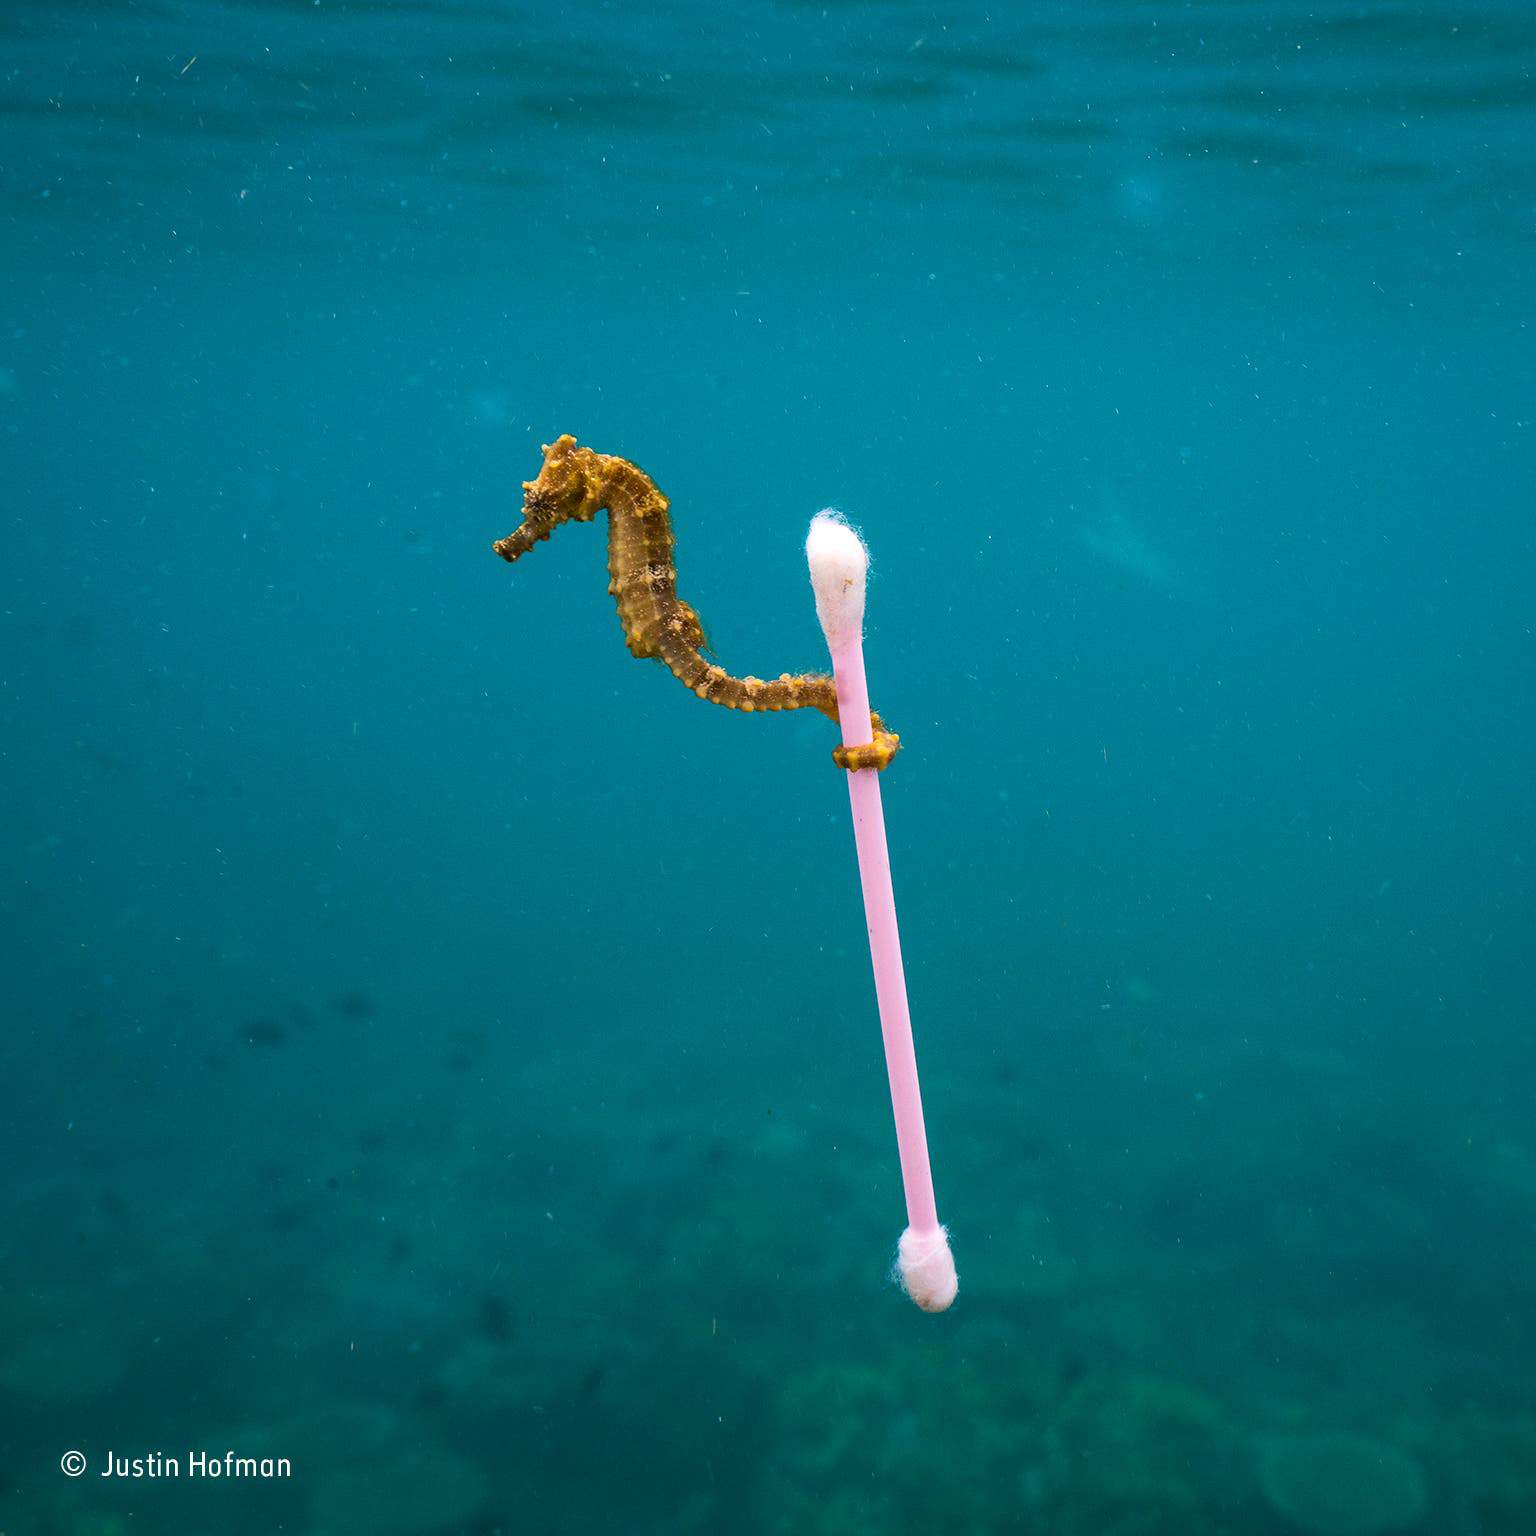 A small seahorse holds a cotton swab tightly in Indonesia. Credit: Justin Hofman via Natural History Museum.